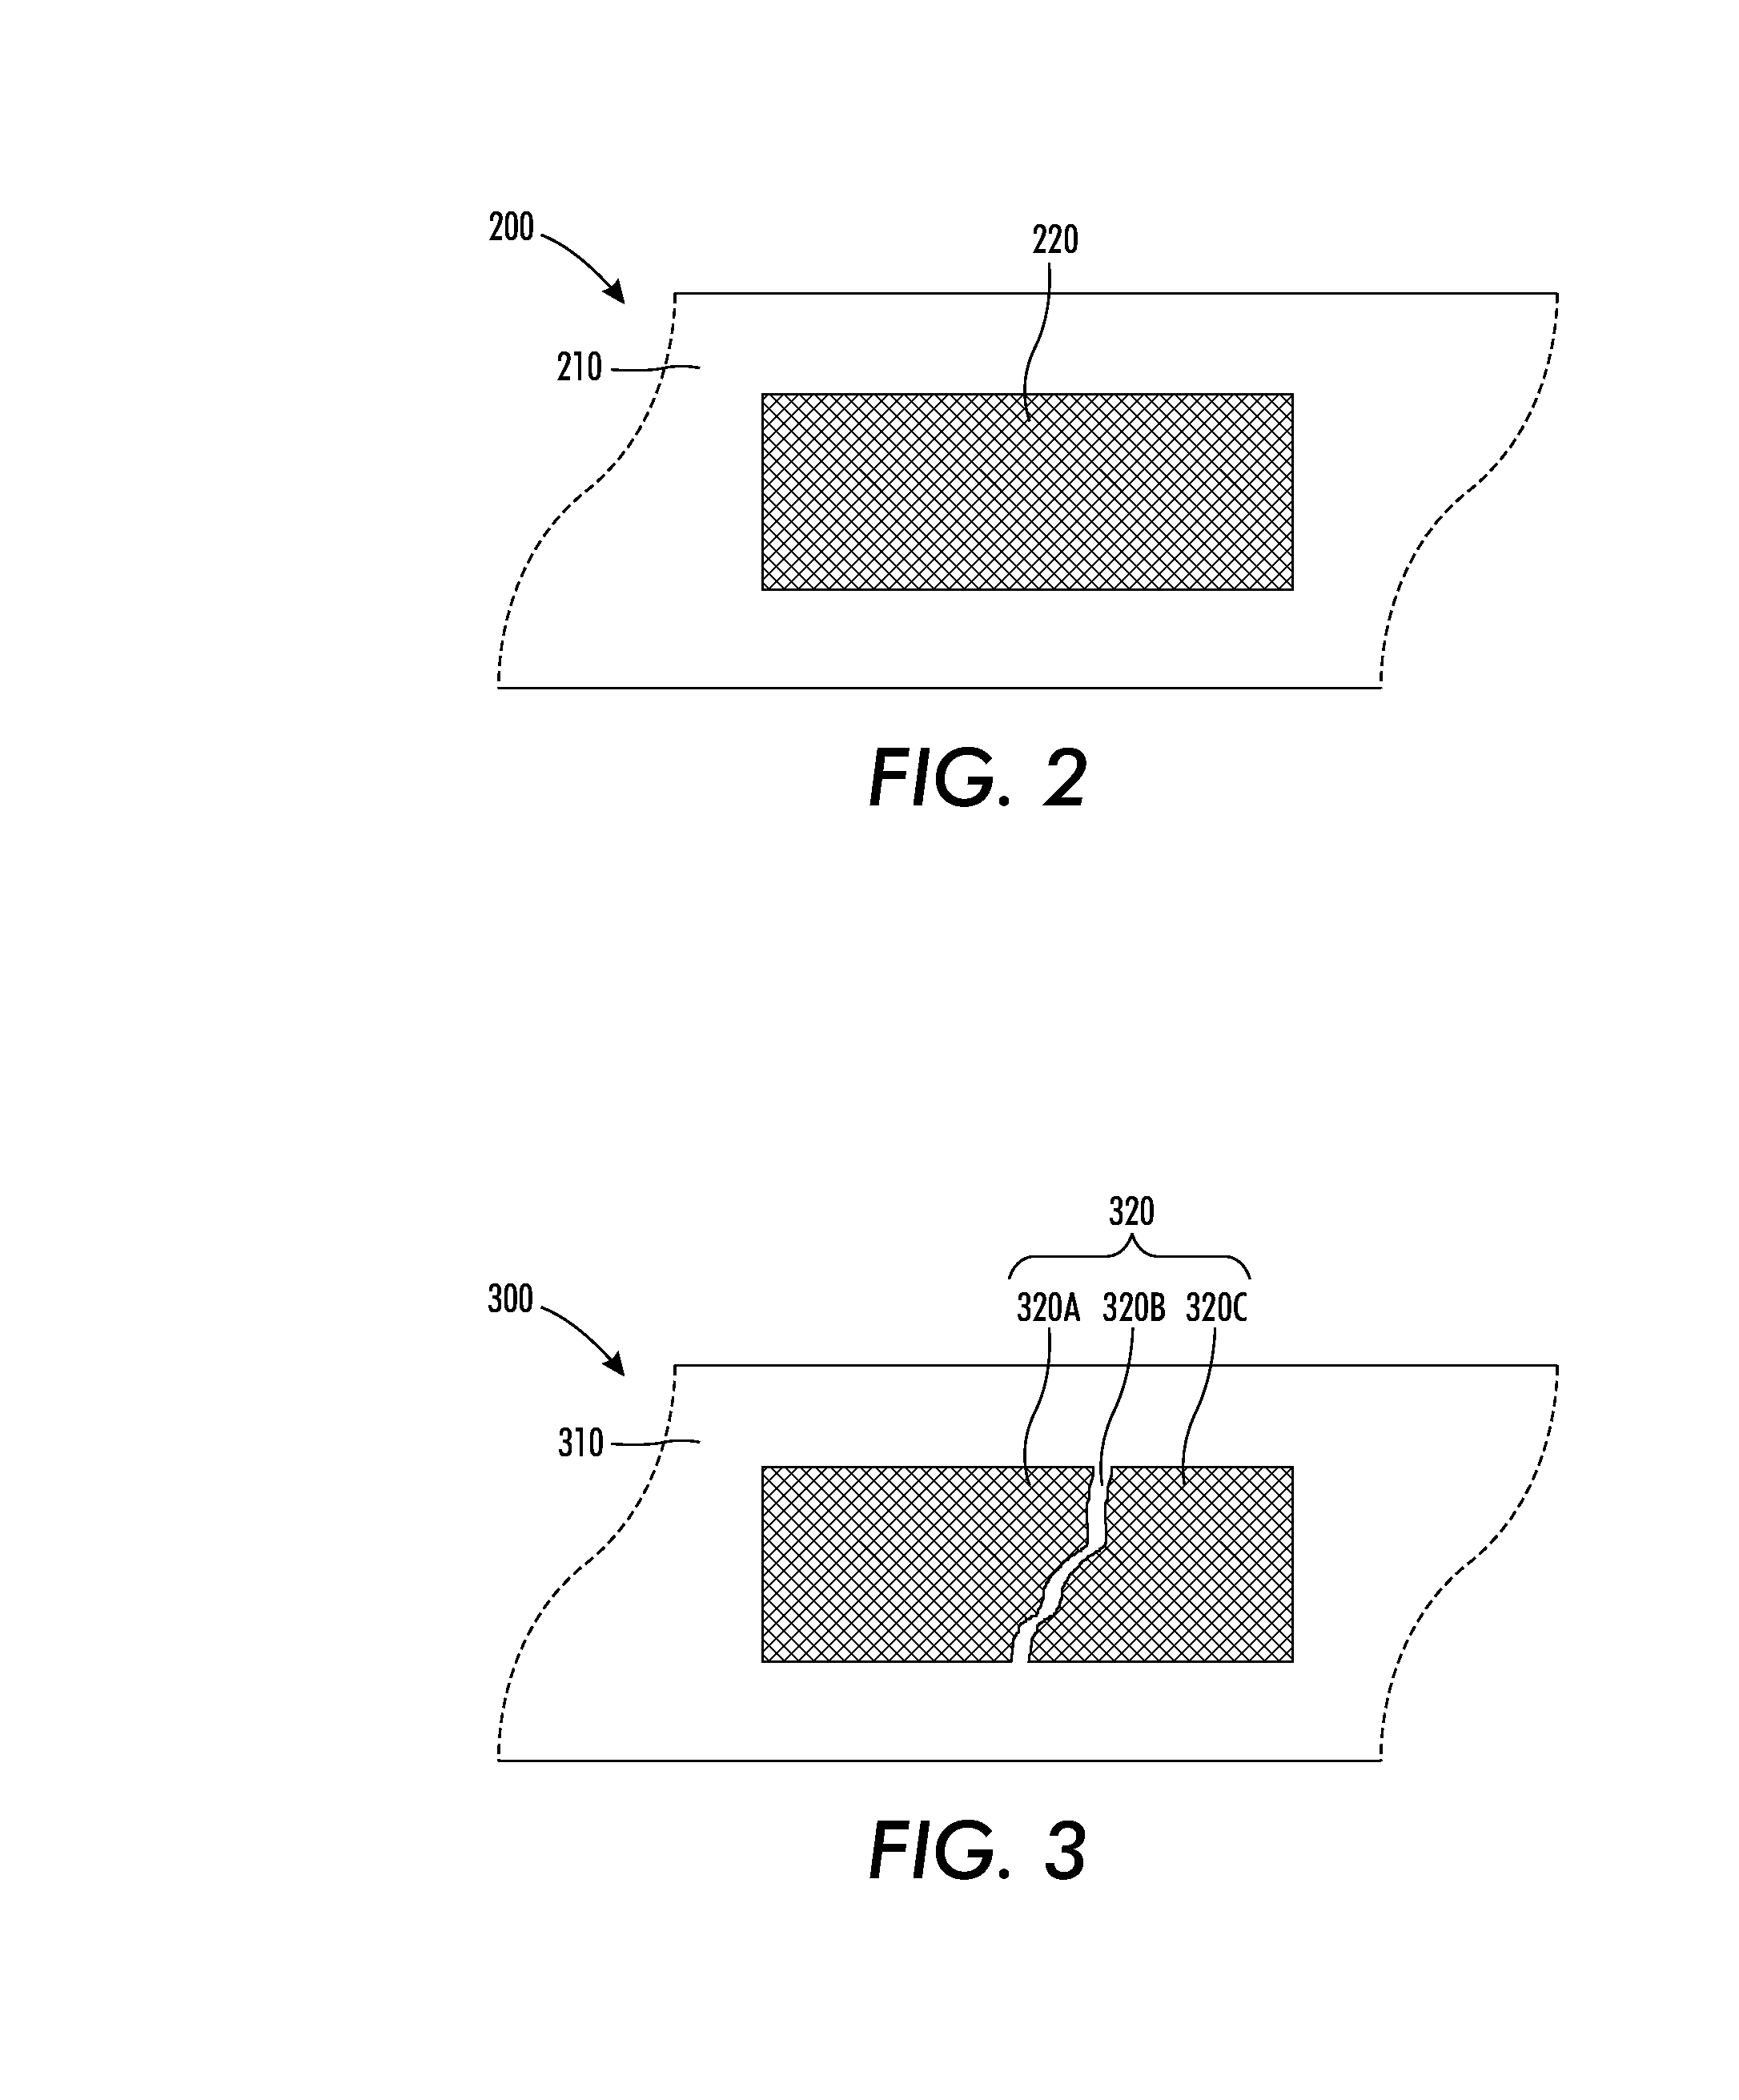 Systems and methods for producing solid ink laminate security features